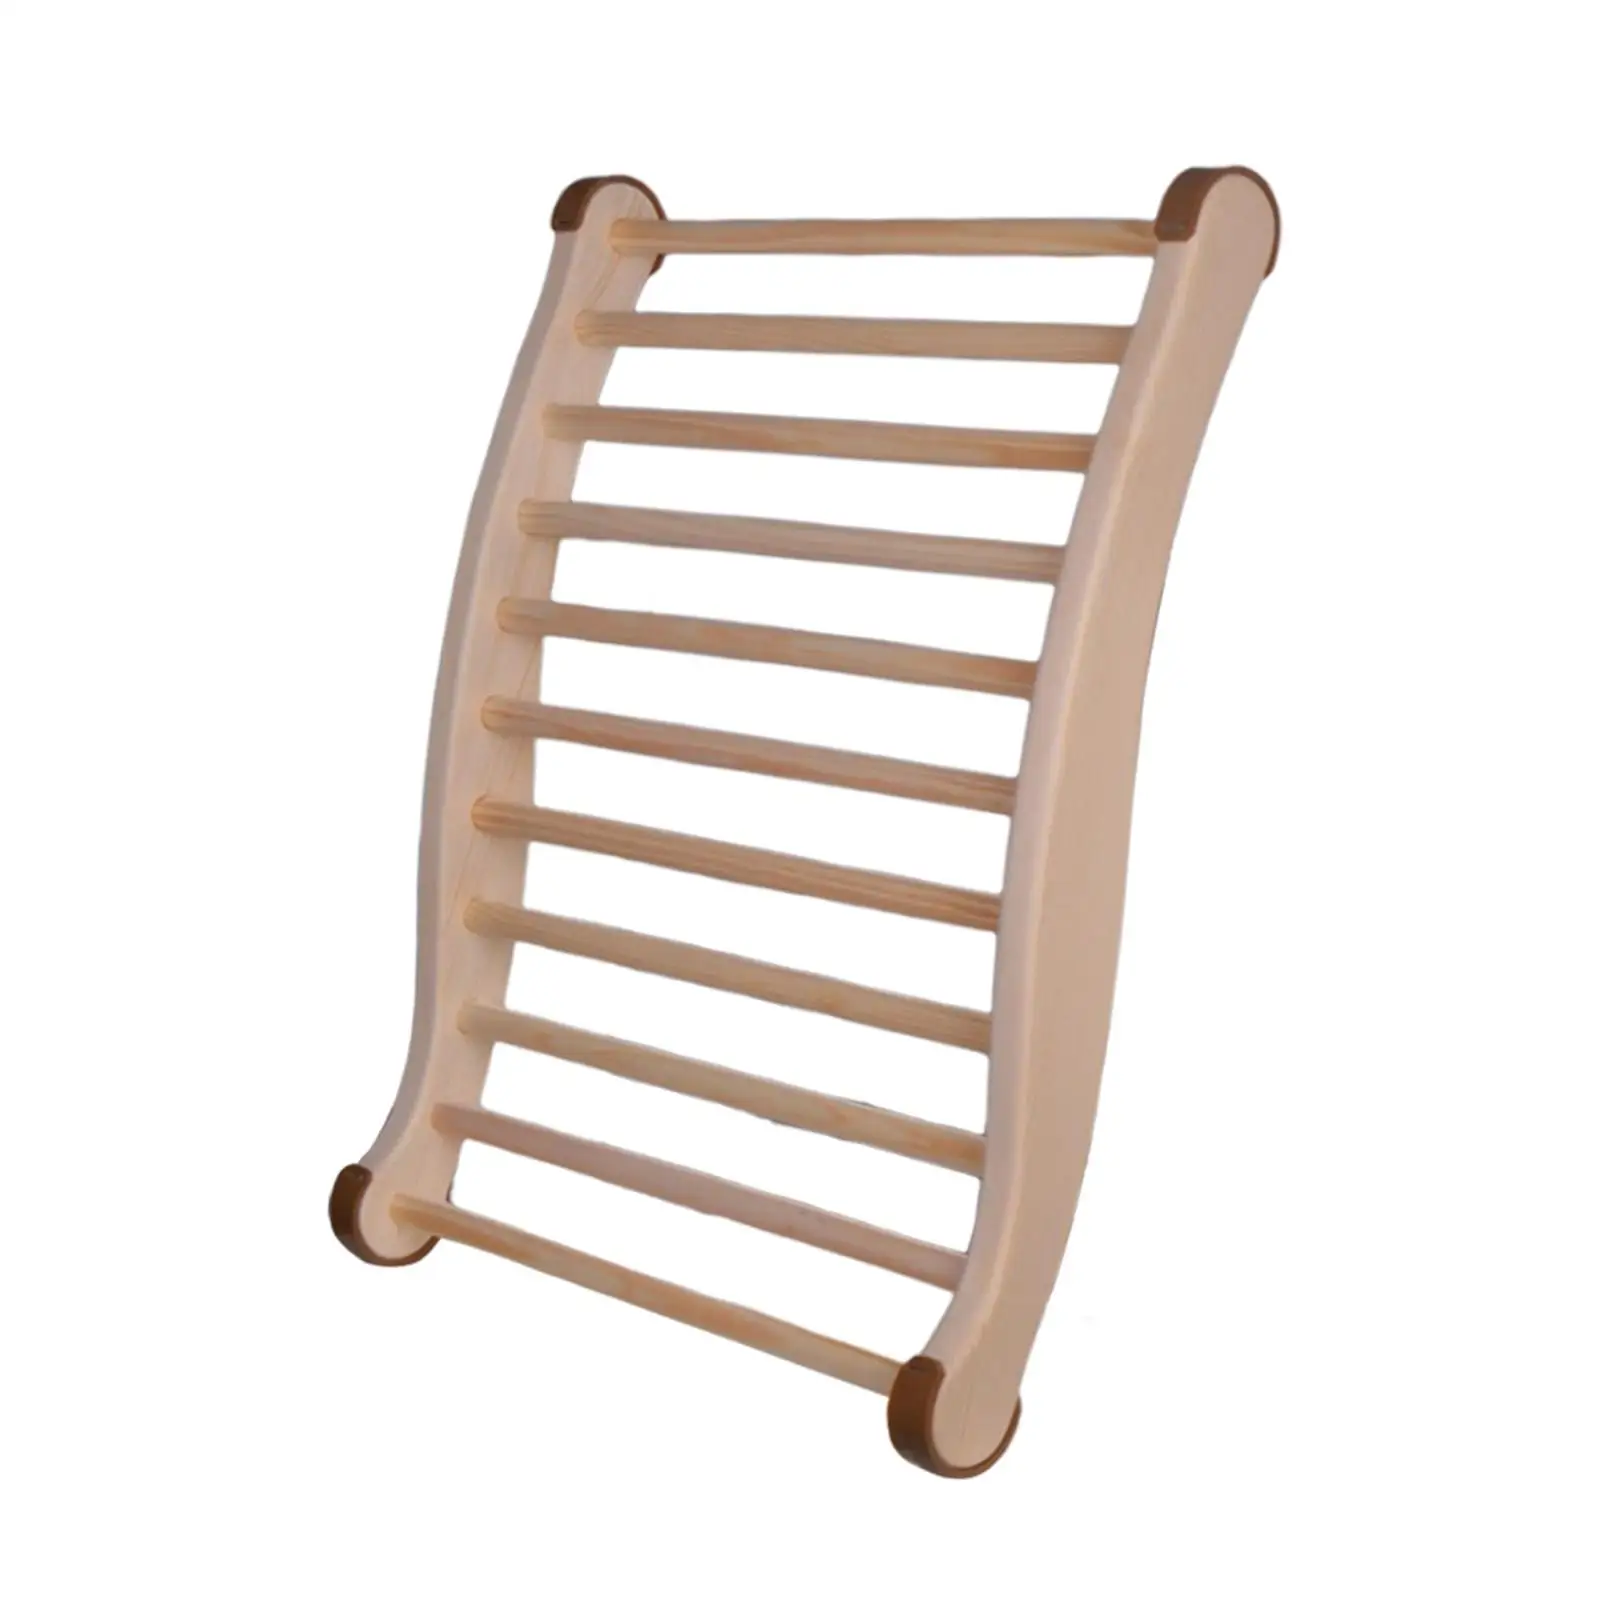 Wooden Curved Cushion Sauna Chair with Sauna Backrest with Ergonomic S-shaped